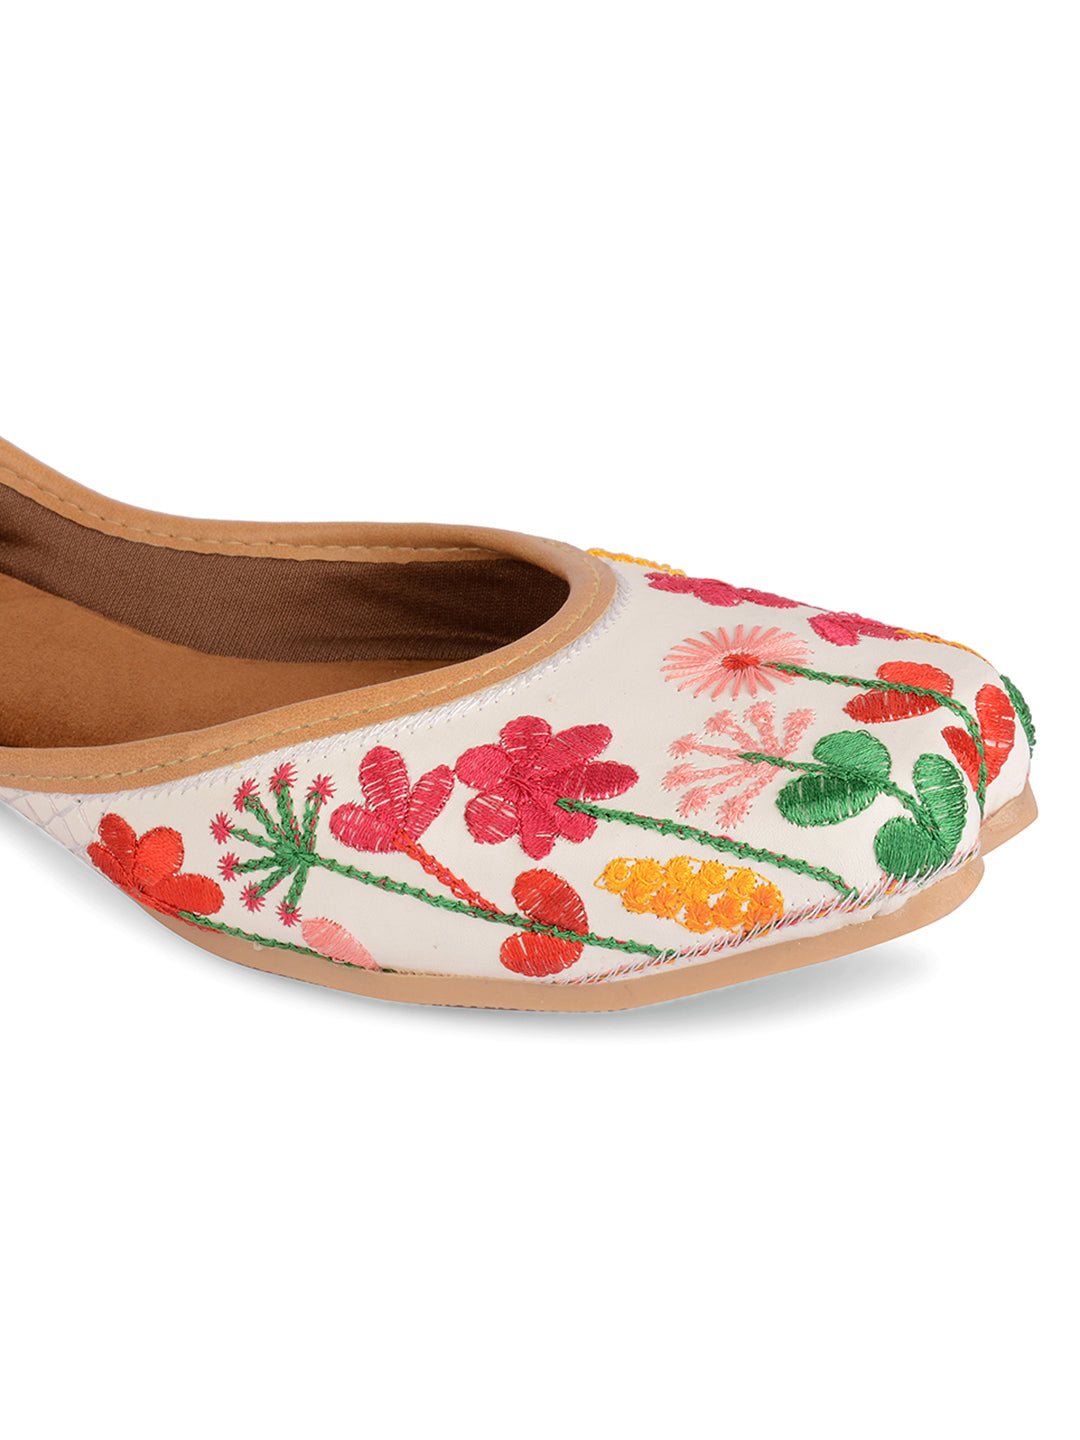 DESI COLOUR Women White Embroidered Comfy Ethnic Flats